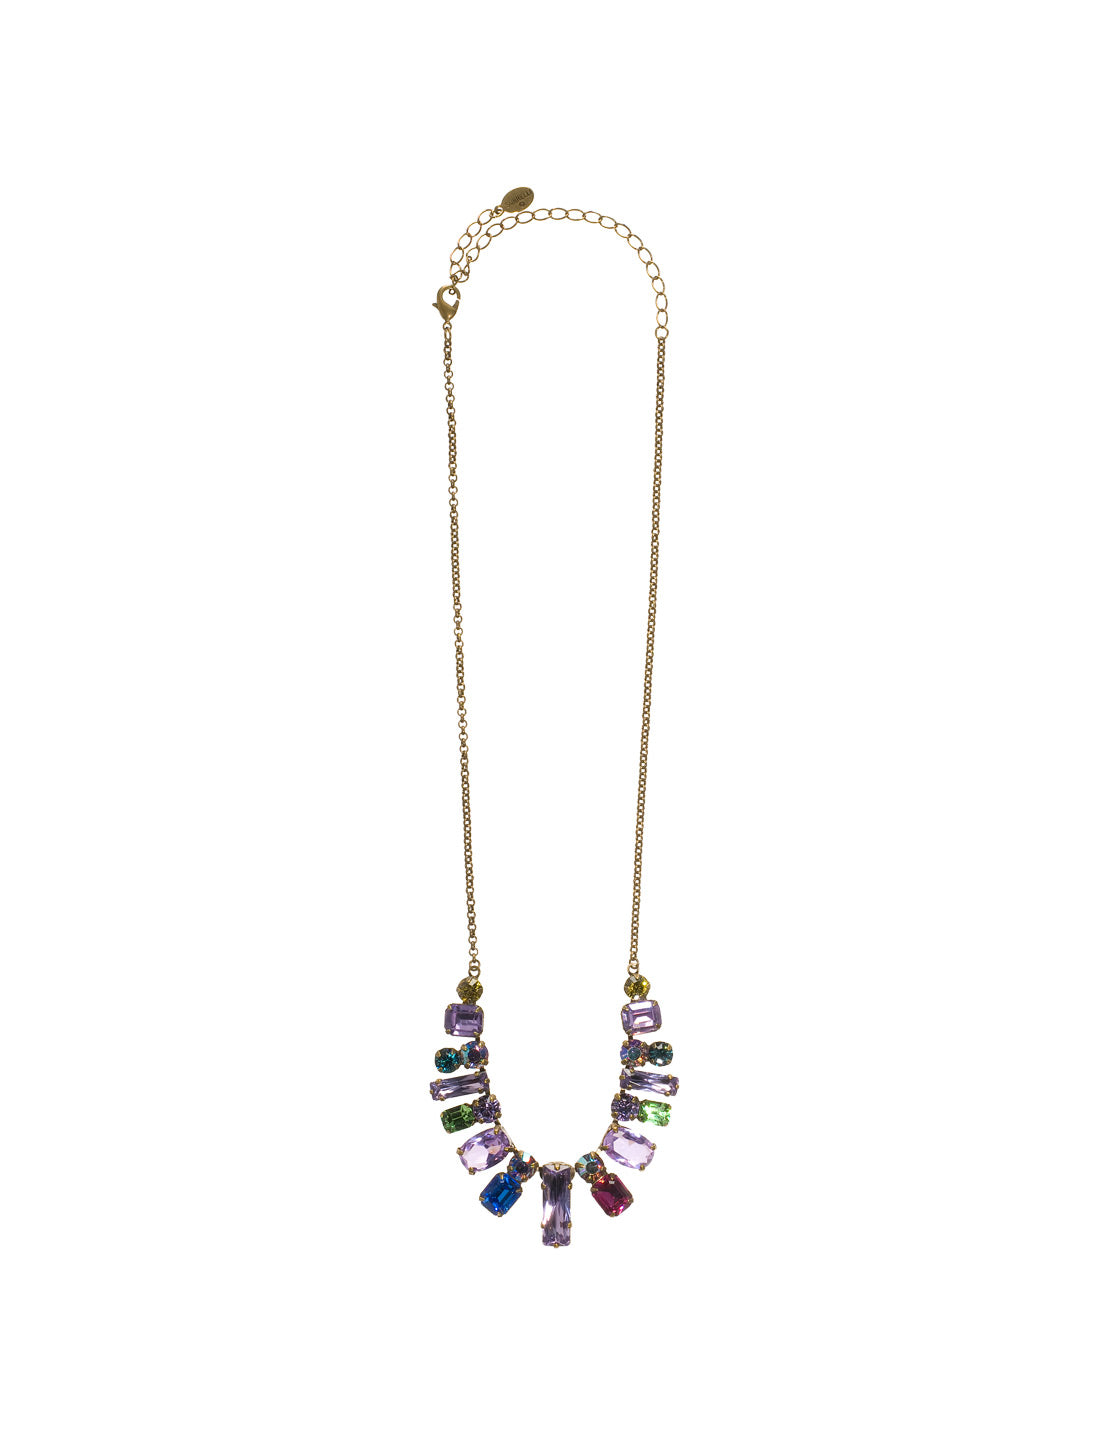 Regal Rectangles Statement Necklace - NCG19AGHAR